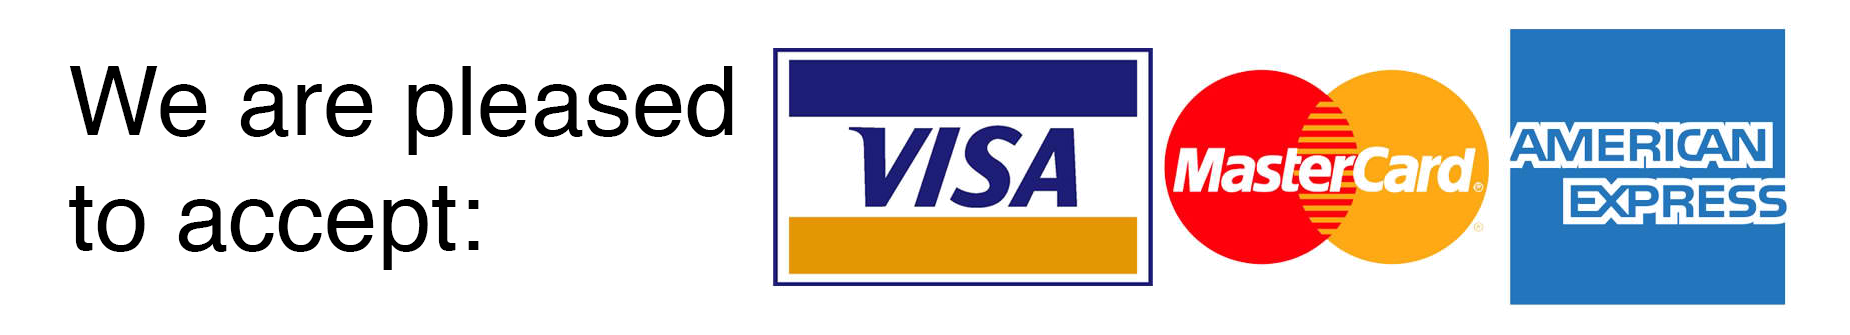 We are pleased to accept Visa, MasterCard, American Express